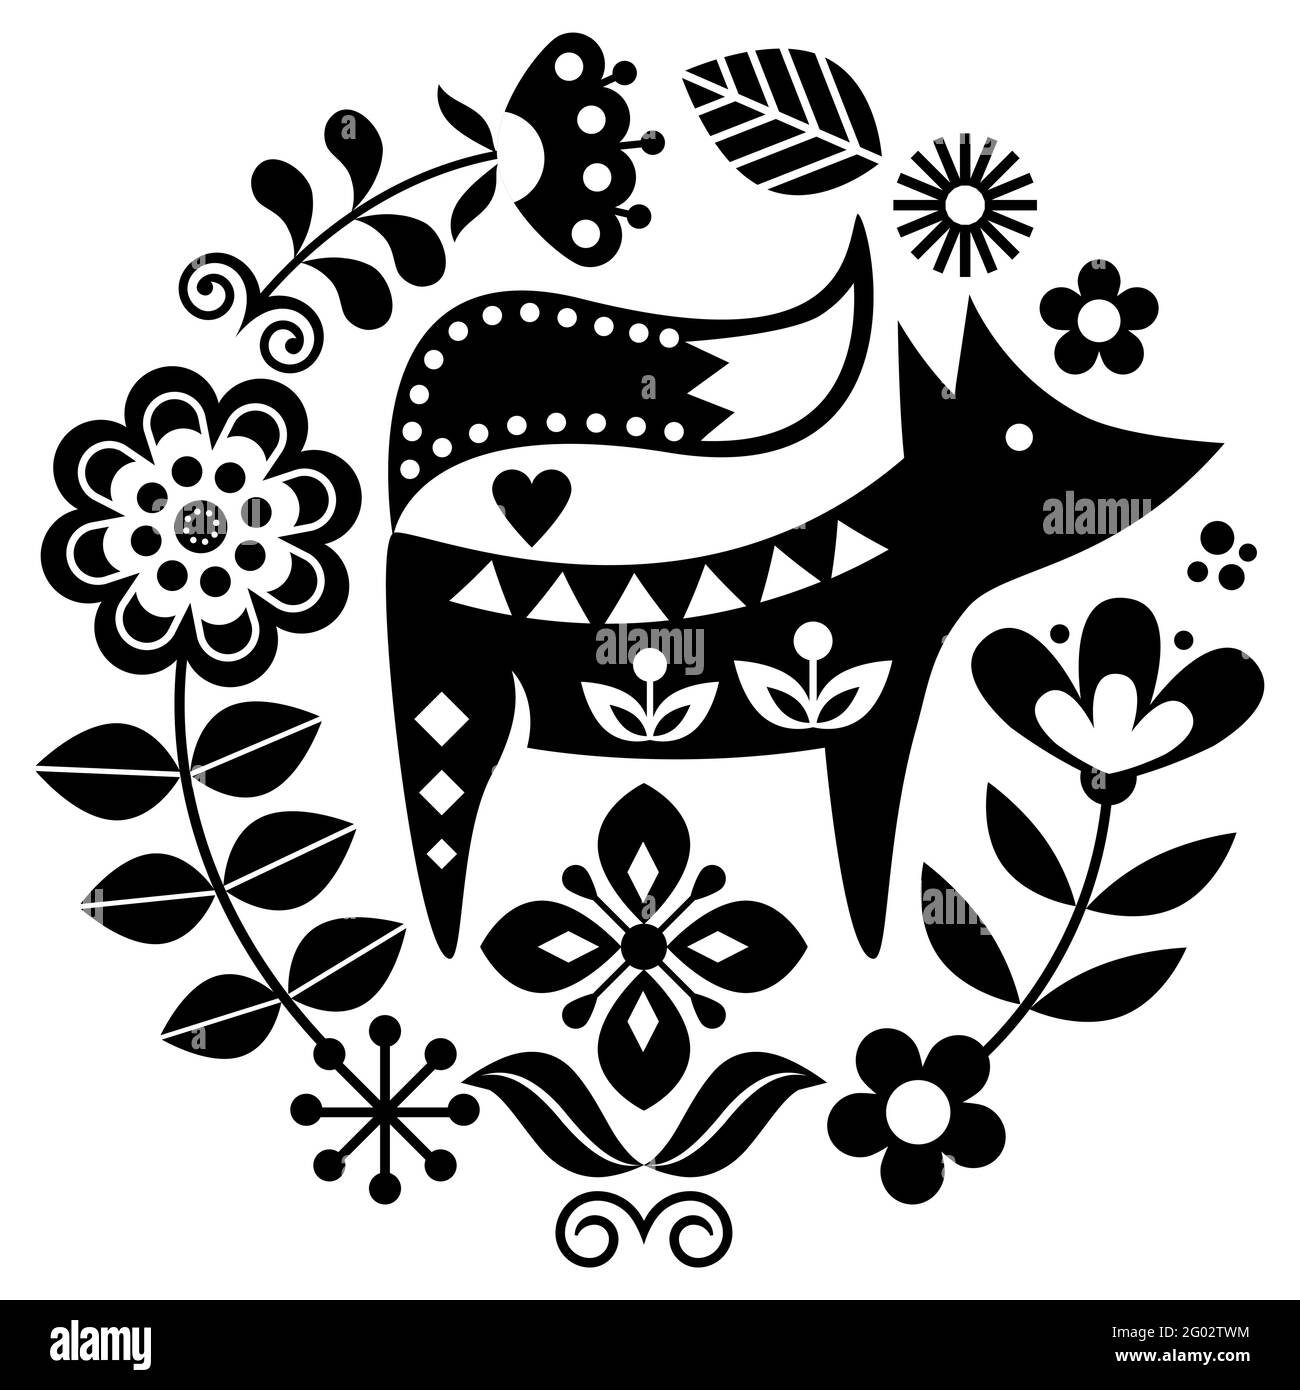 Scandinavian folk art vector round pattern with flowers and fox, black and white floral greeting card or invitation inspired by traditional embroidery Stock Vector